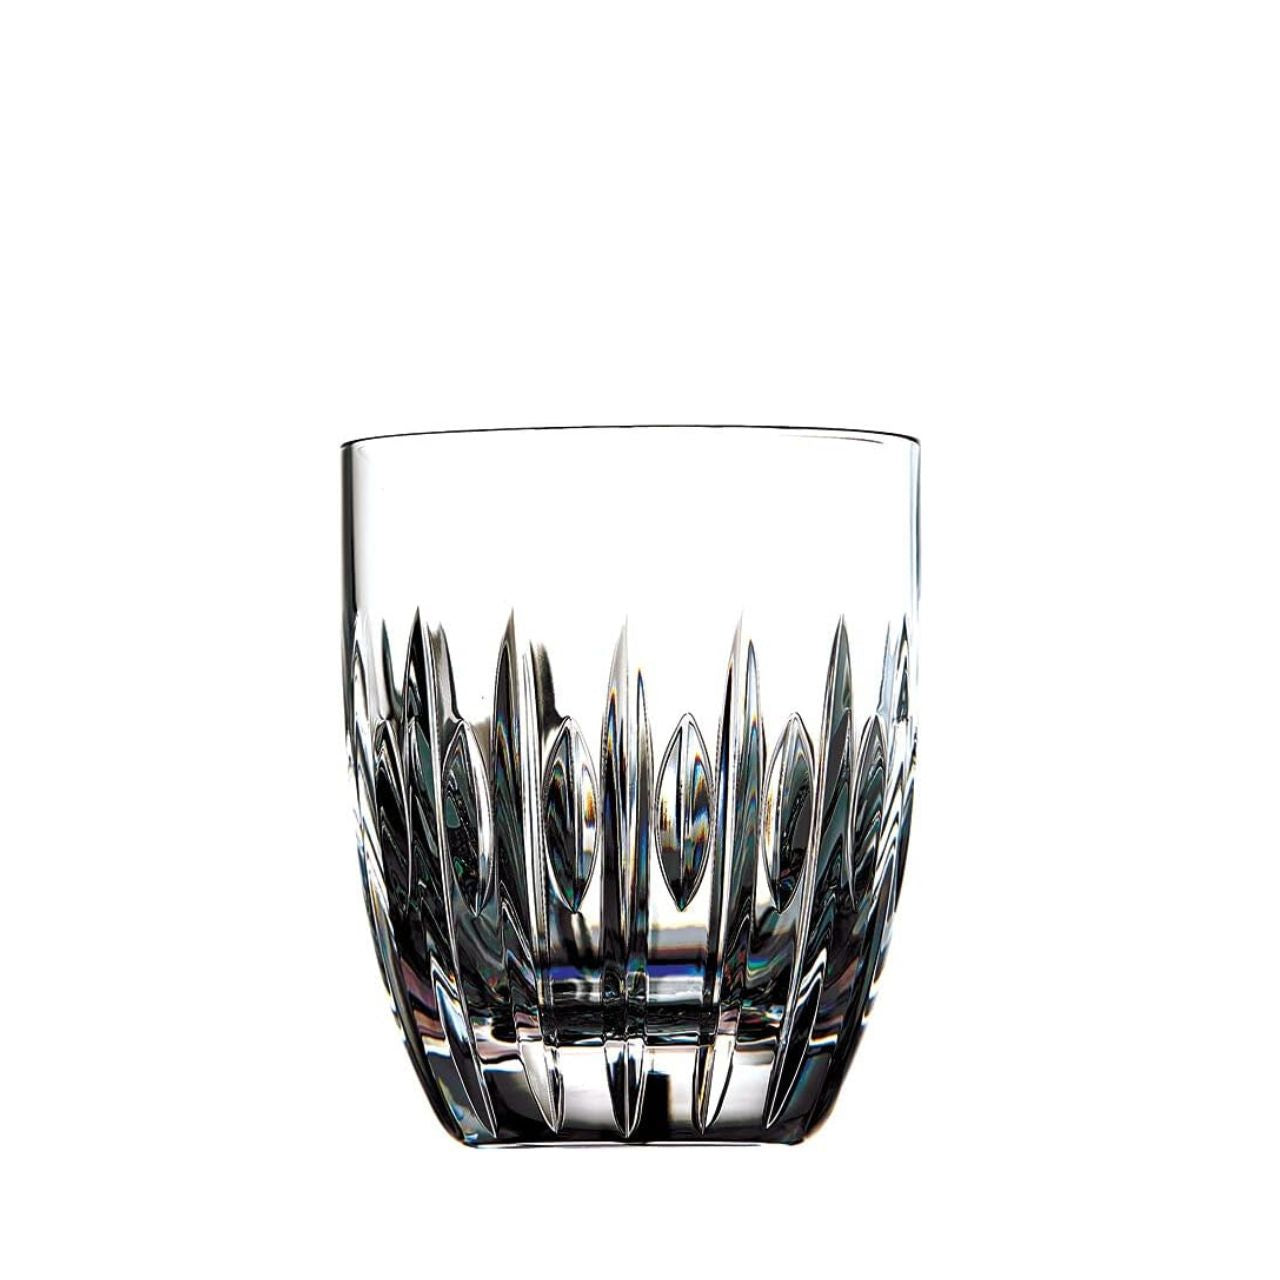 Waterford Crystal Ardan Mara Tumbler Set of 6  Waterford Ardan offers the beauty of simplicity with the Mara pattern. Mara is the Irish meaning for sea and is inspired by the wild Atlantic Ocean with long and short deep vertical cuts. The Ardan Mara Tumbler set is perfect for every day use.